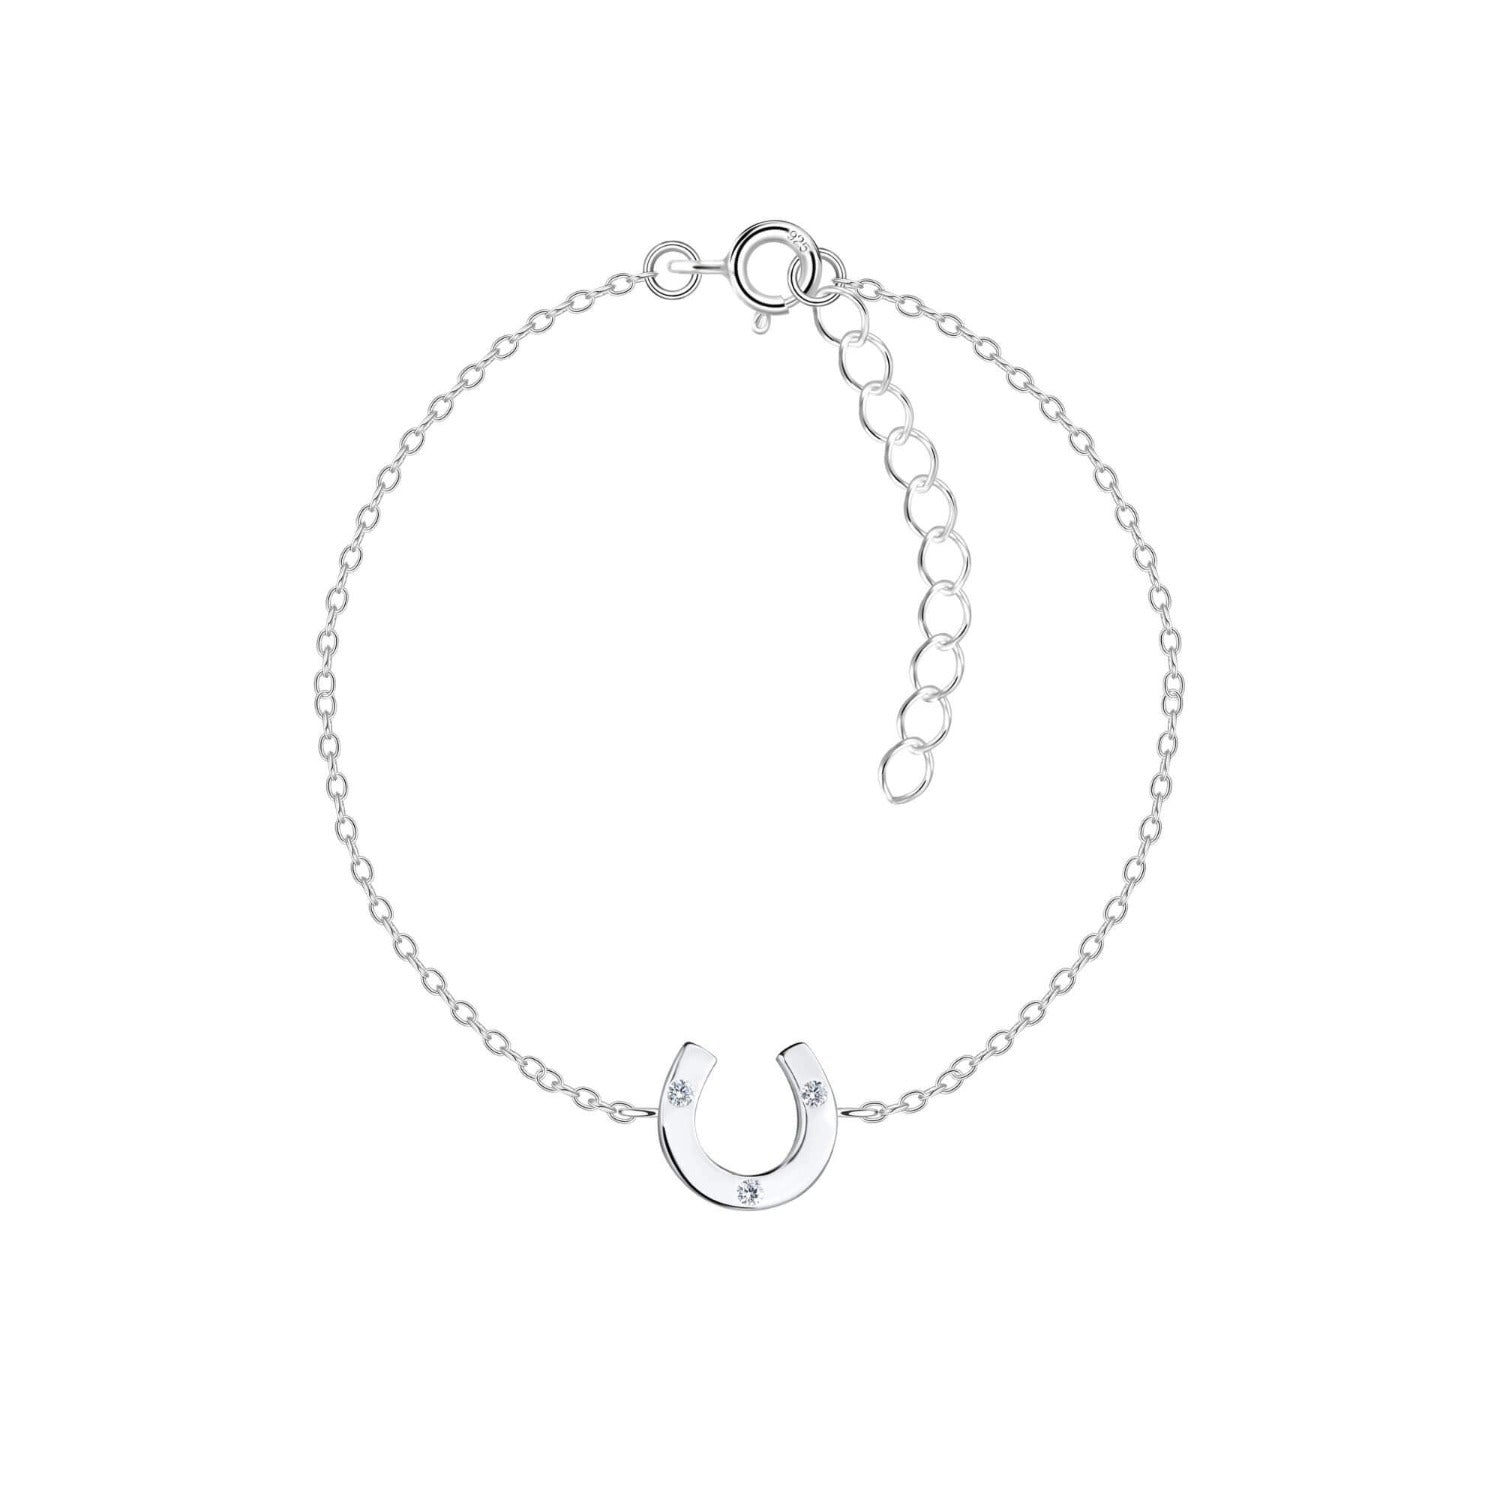 horseshoe sterling silver bracelet with extension